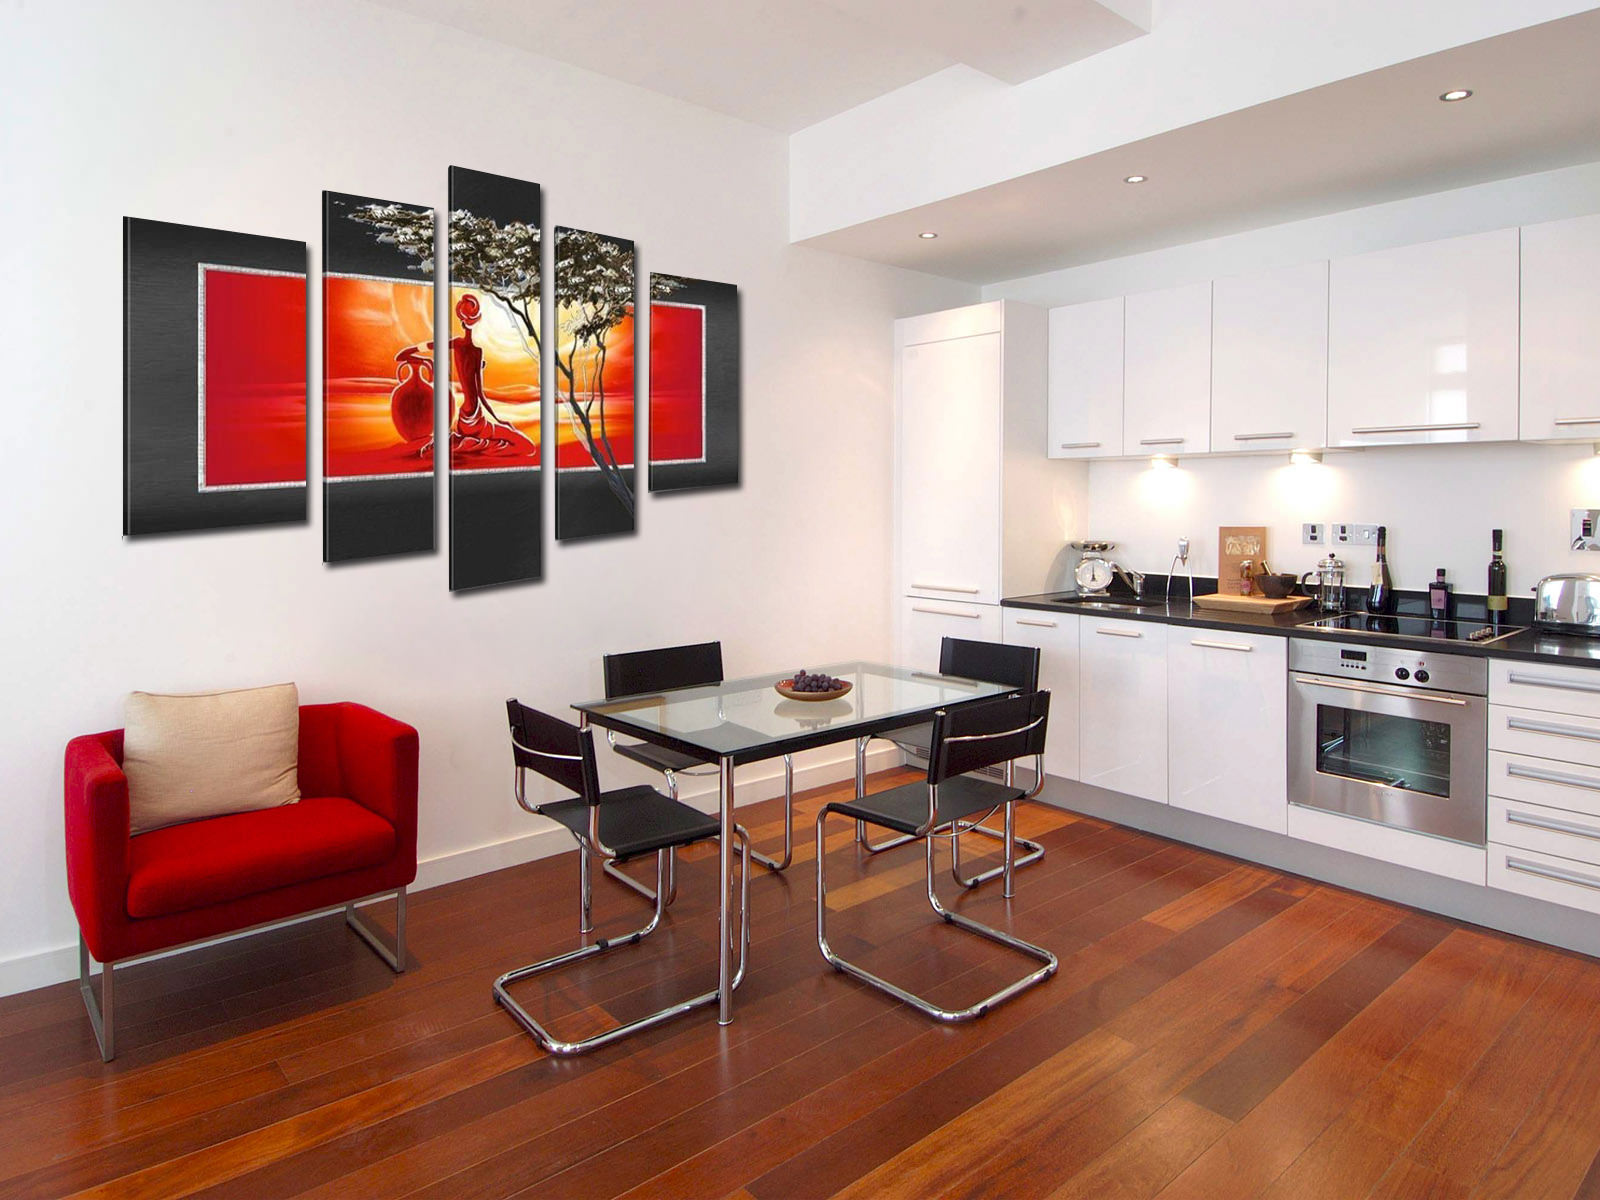 Stylish modular paintings in the interior of the kitchen